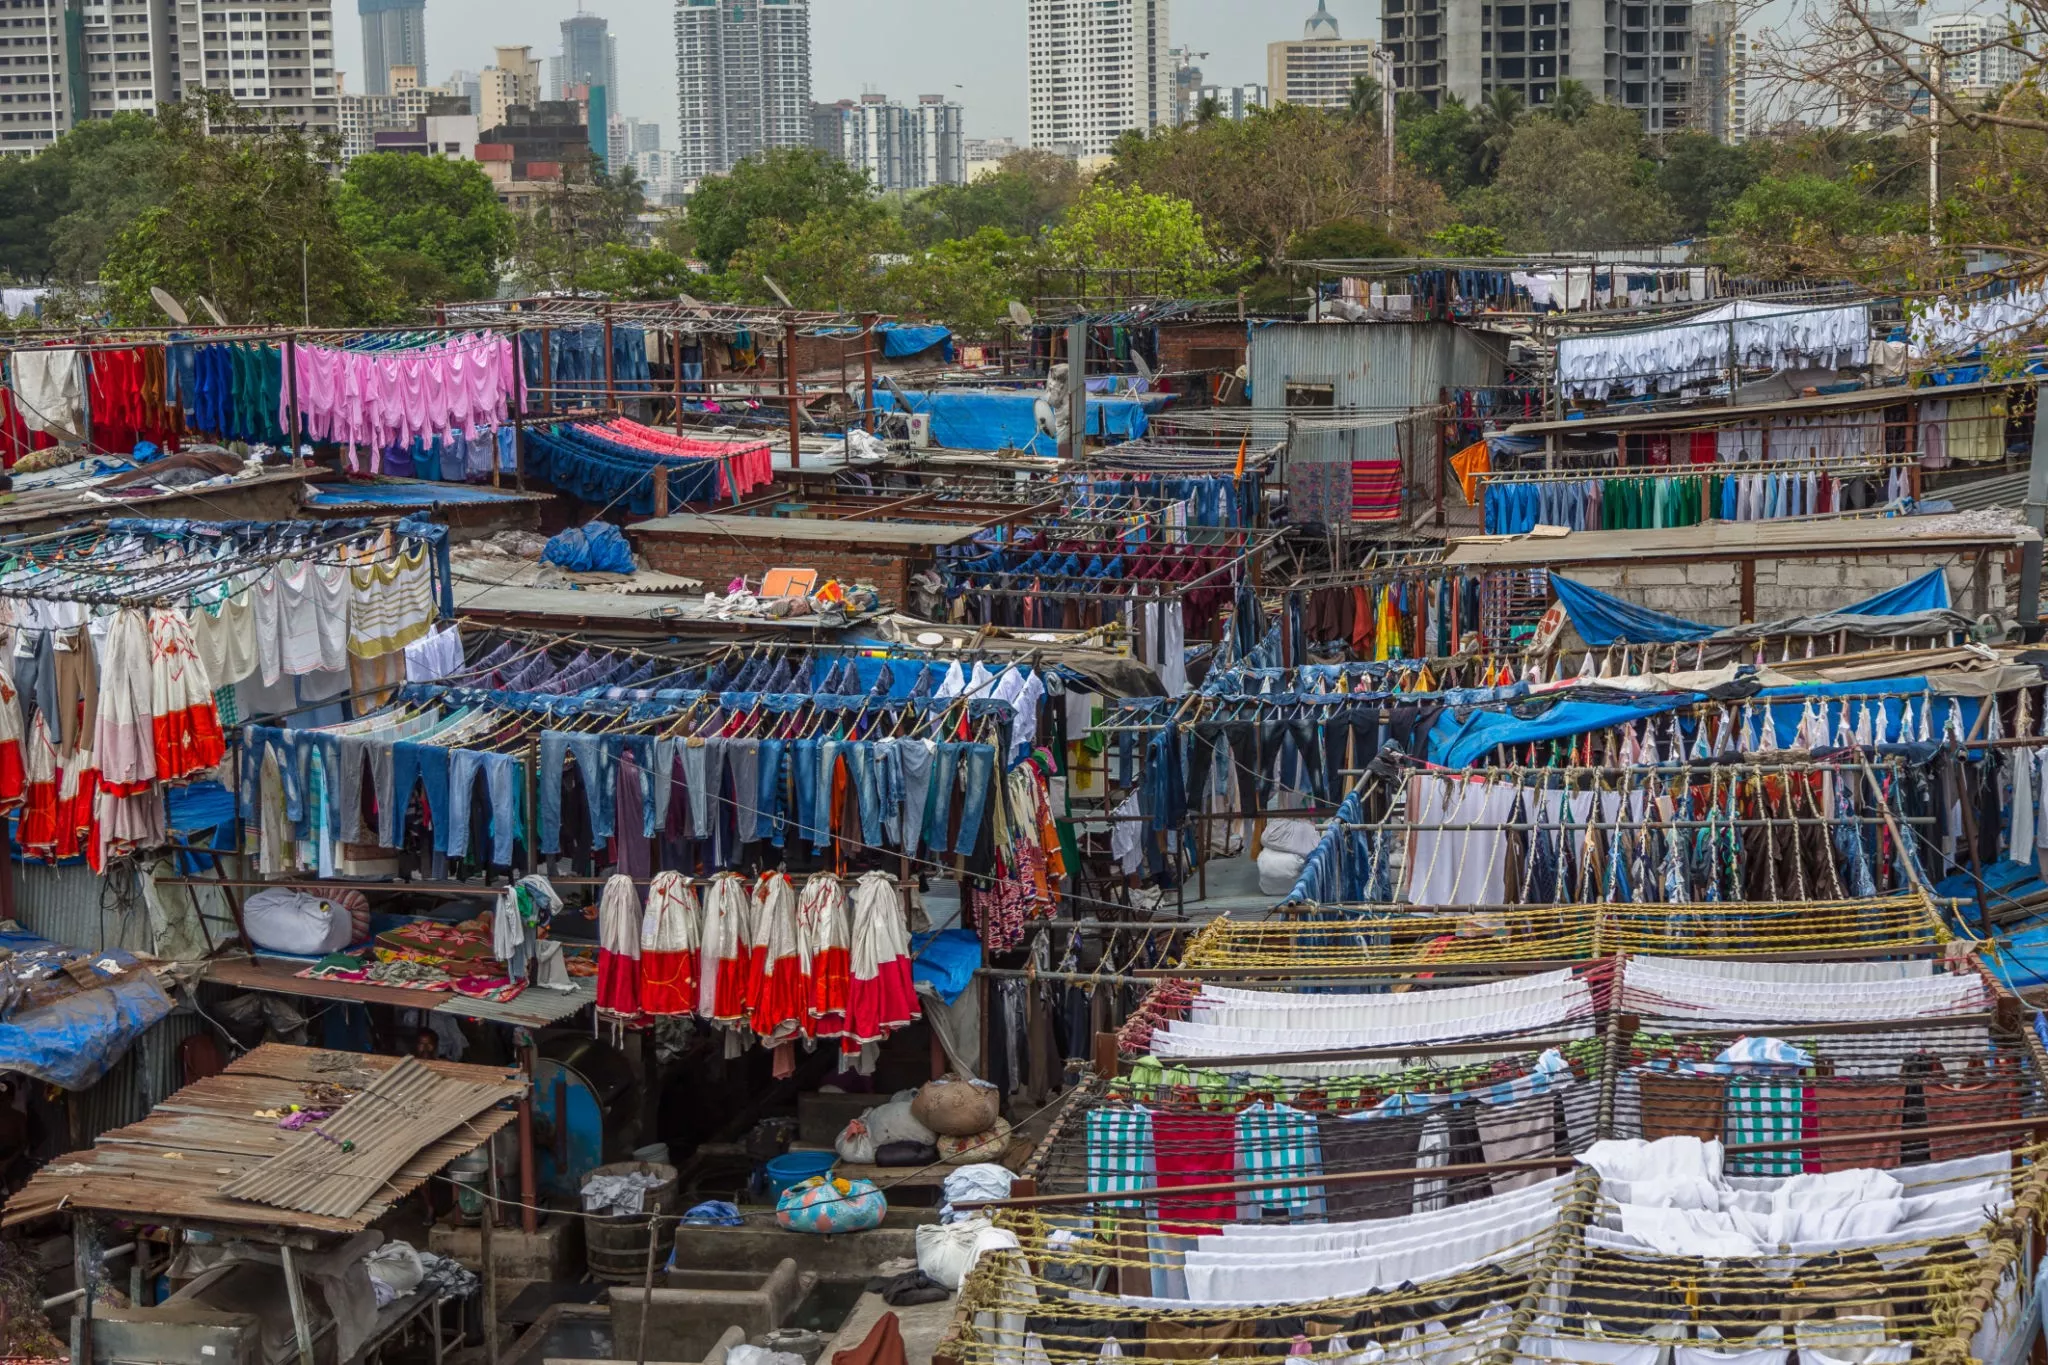 Dhobi Ghat in India, Central Asia | Architecture - Rated 3.3